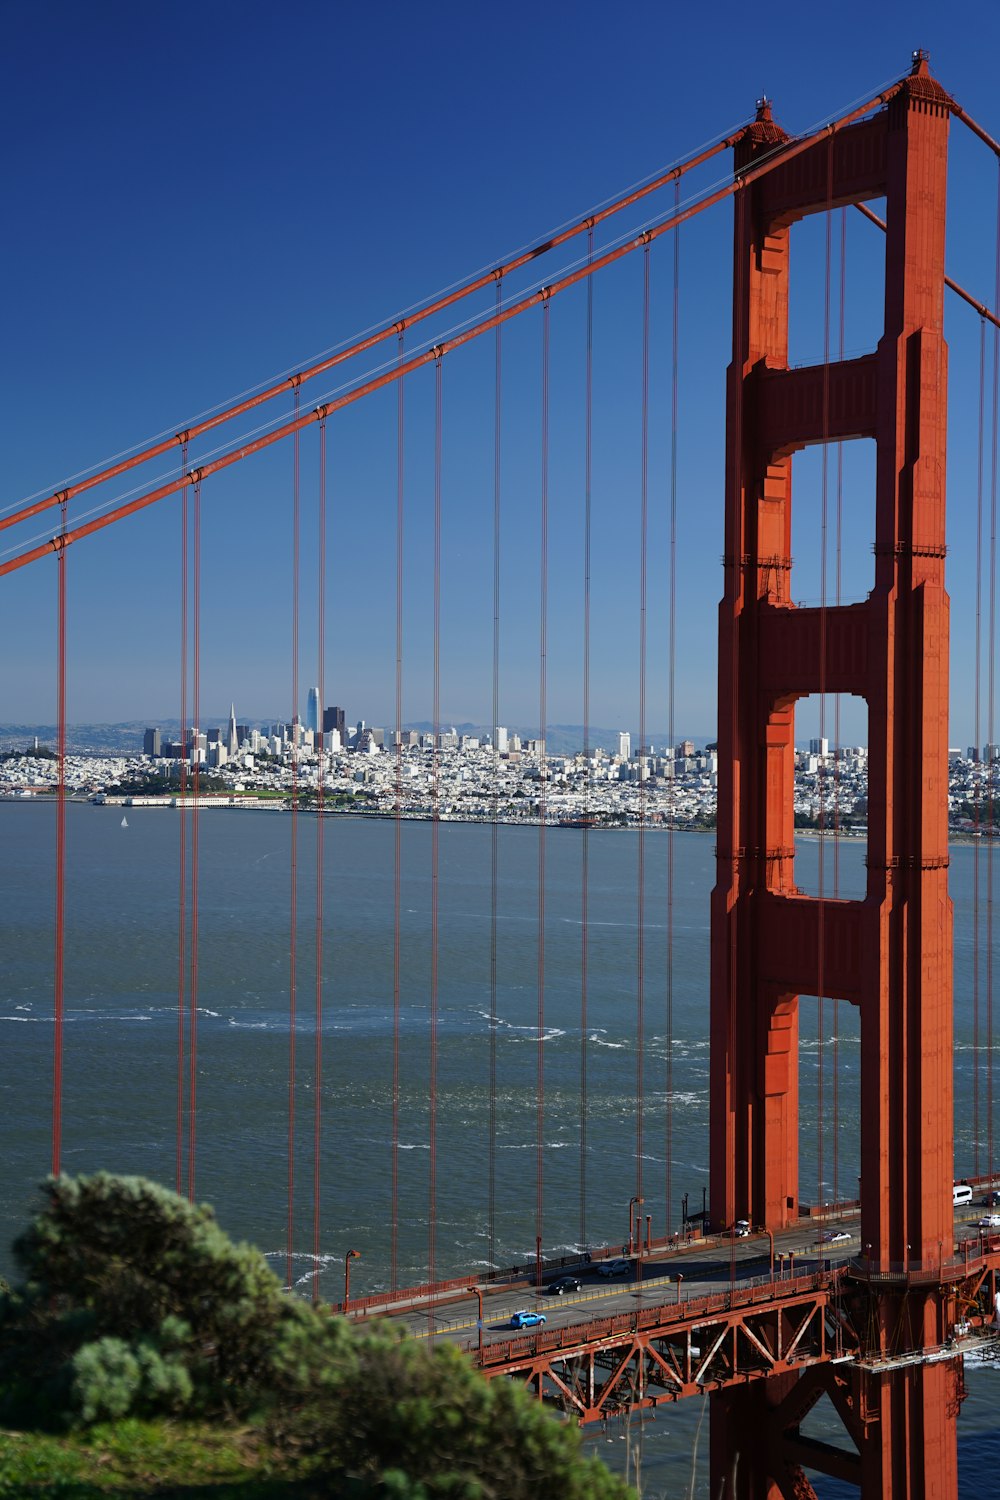 a view of the golden gate bridge in san francisco